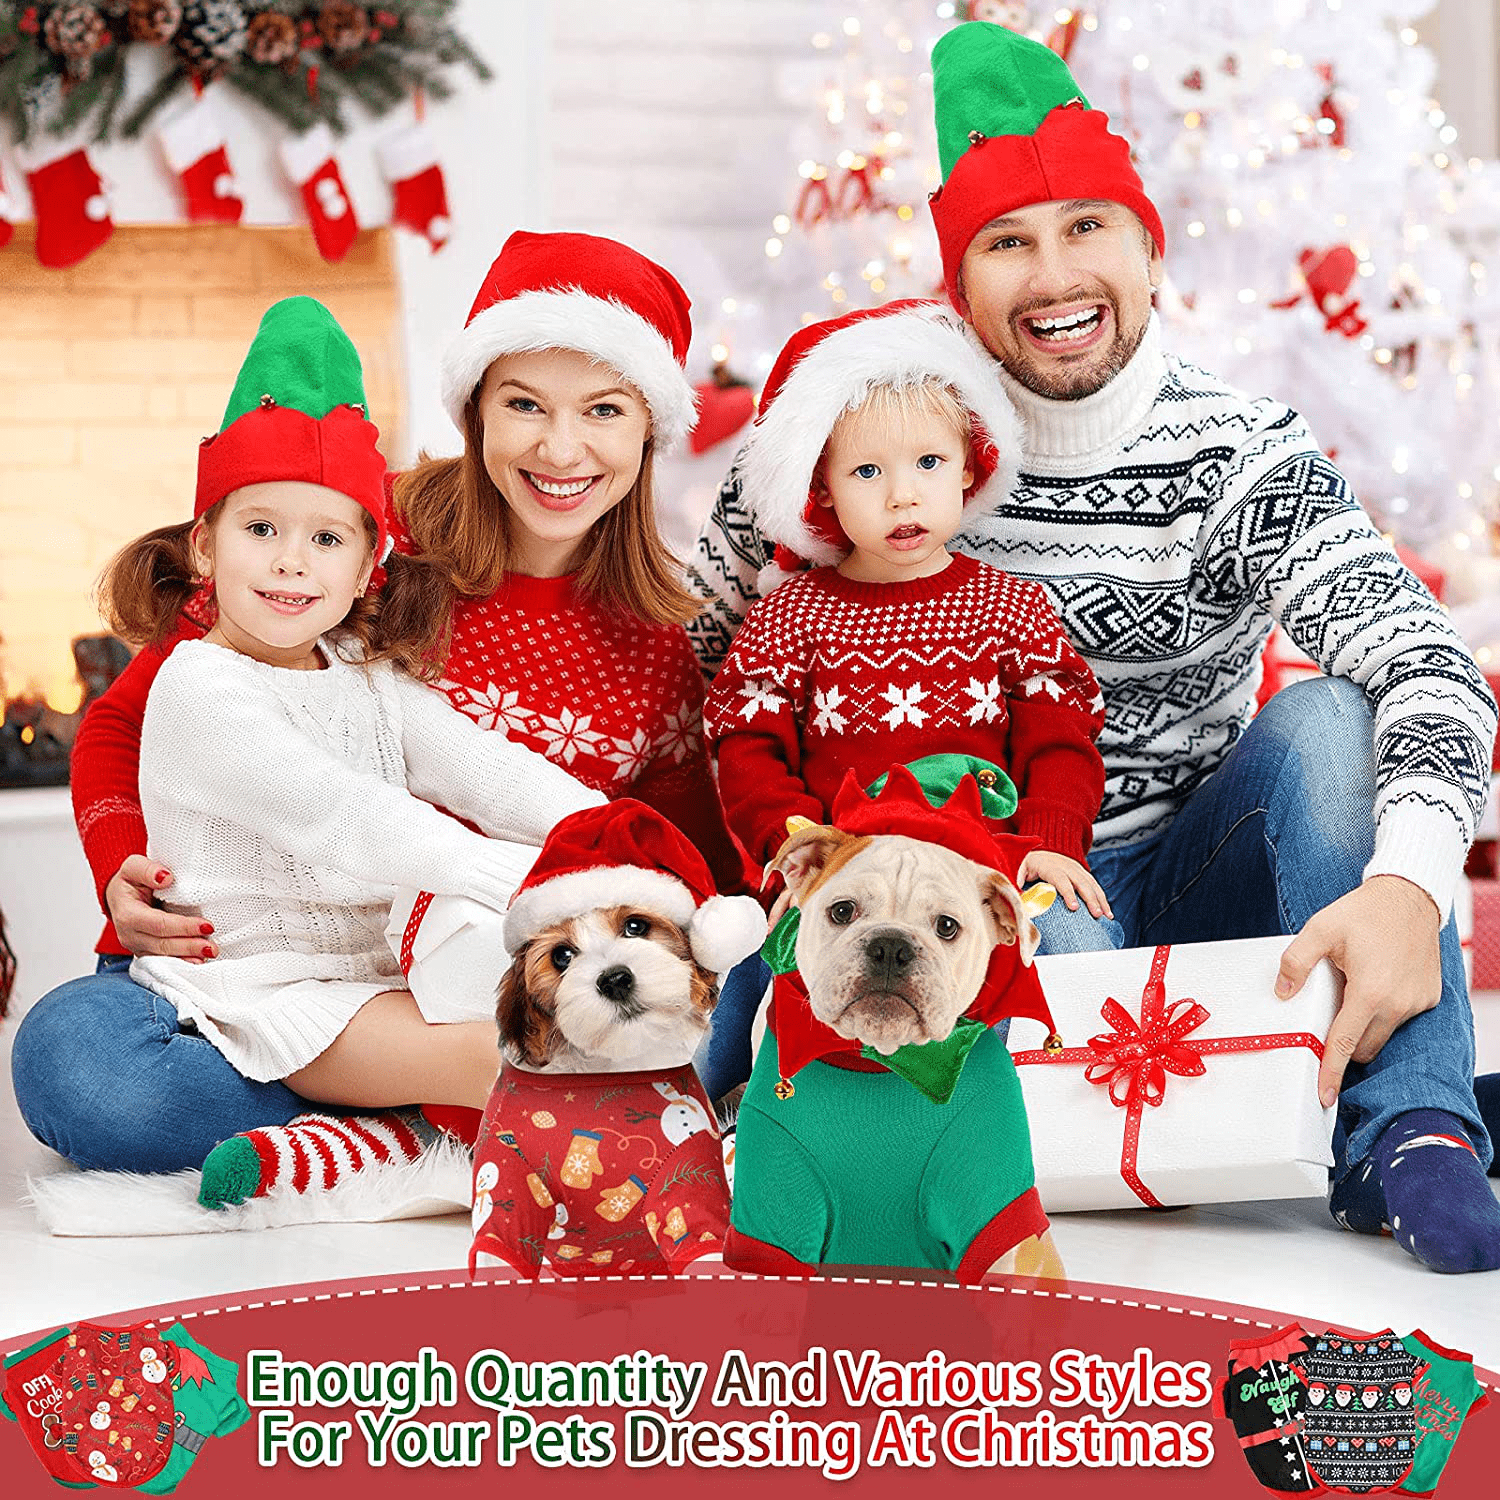 6 Pieces Christmas Dog Shirts Printed Puppy Clothes Soft Breathable Puppy Shirts Christmas Printed Pet T-Shirt Colorful Dog Outfits Puppy Sweatshirt Pullover Clothes for Small Medium Pets